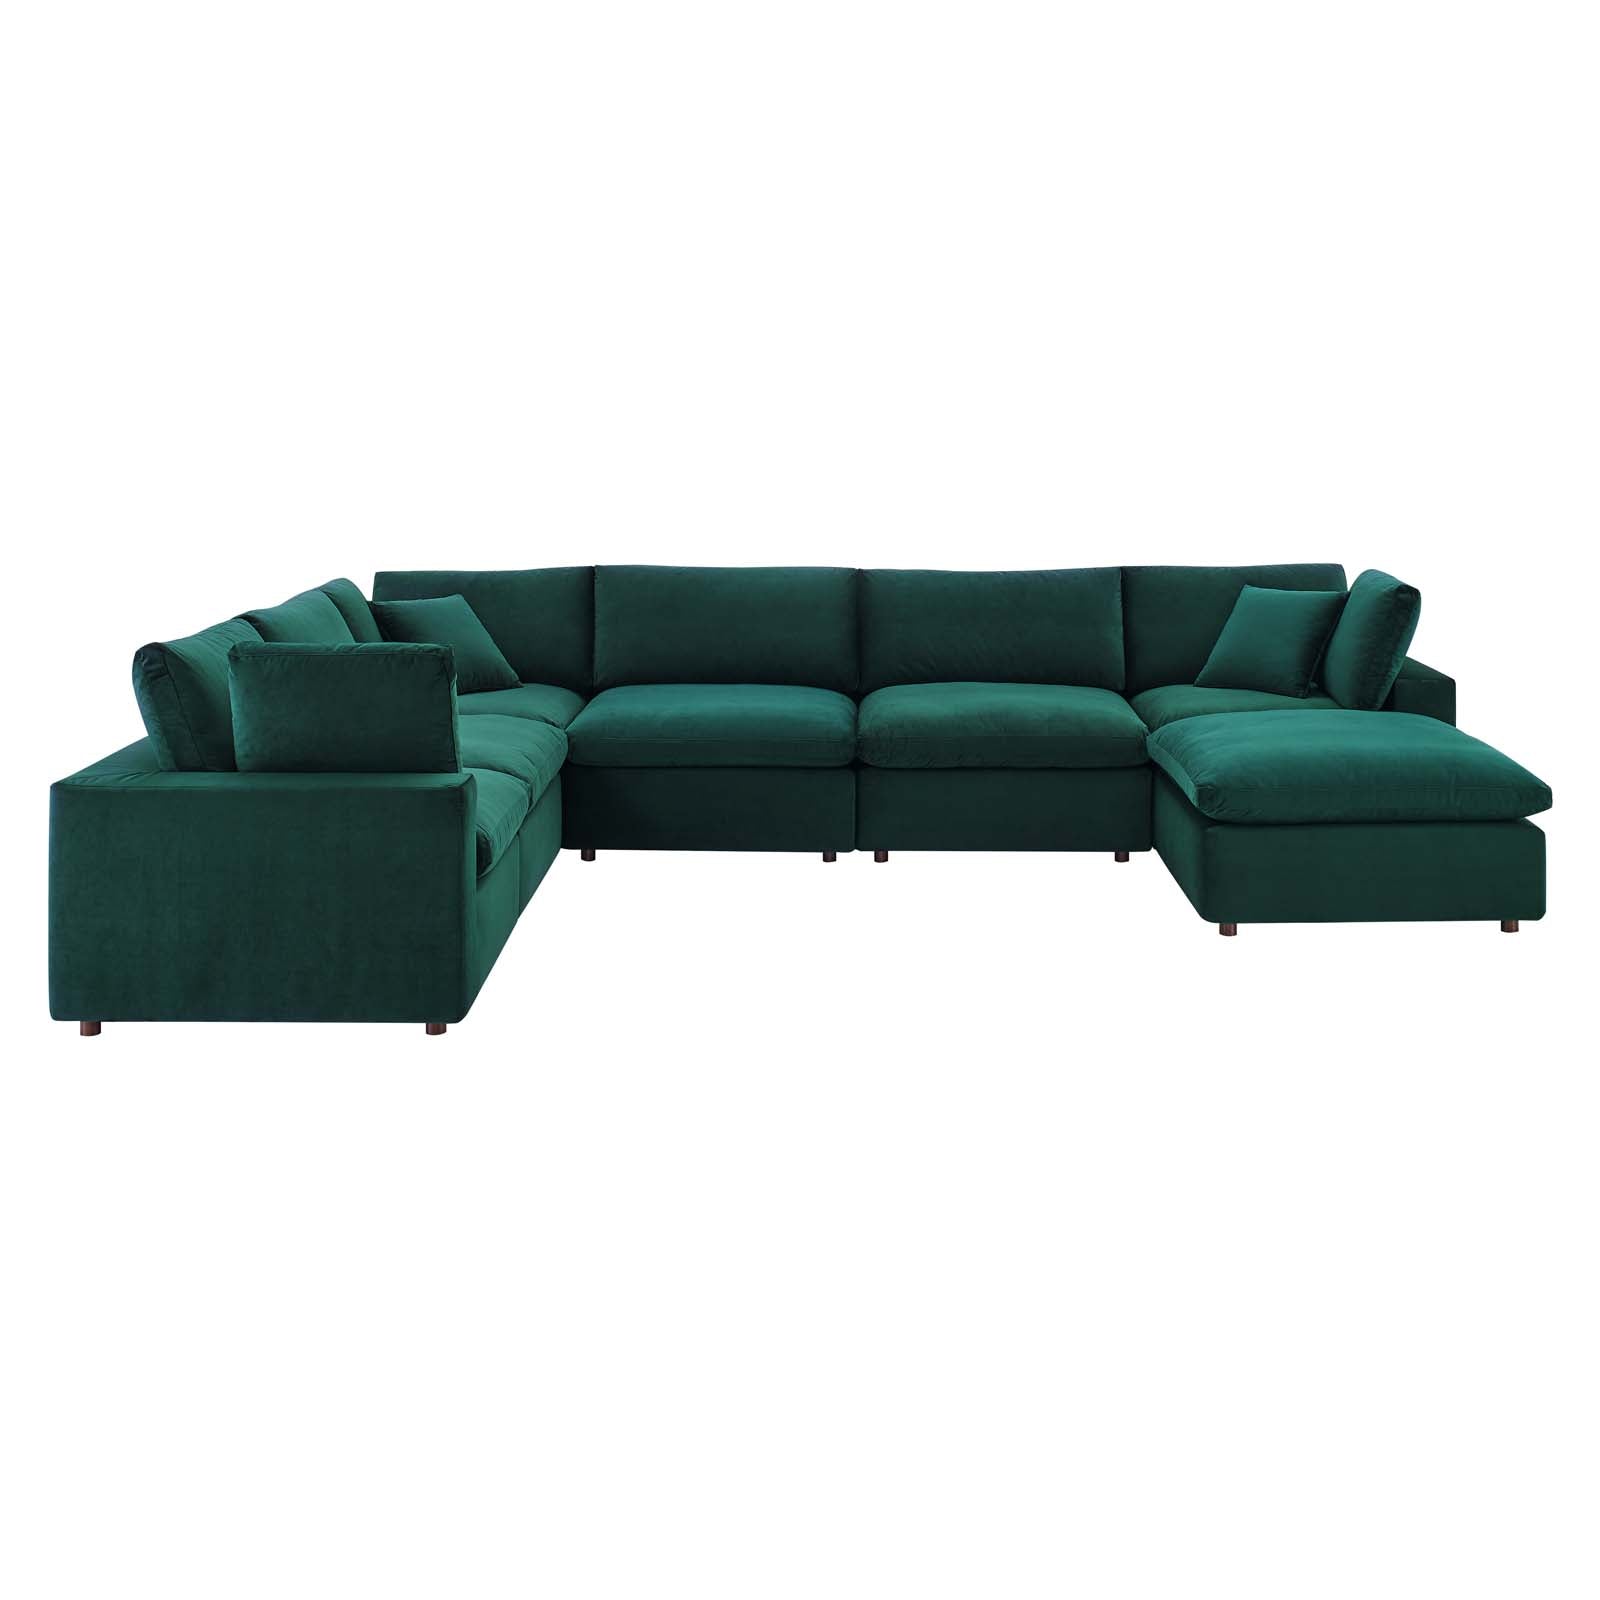 Commix Down Filled Overstuffed Performance Velvet 7-Piece Sectional Sofa-Sectional-Modway-Wall2Wall Furnishings